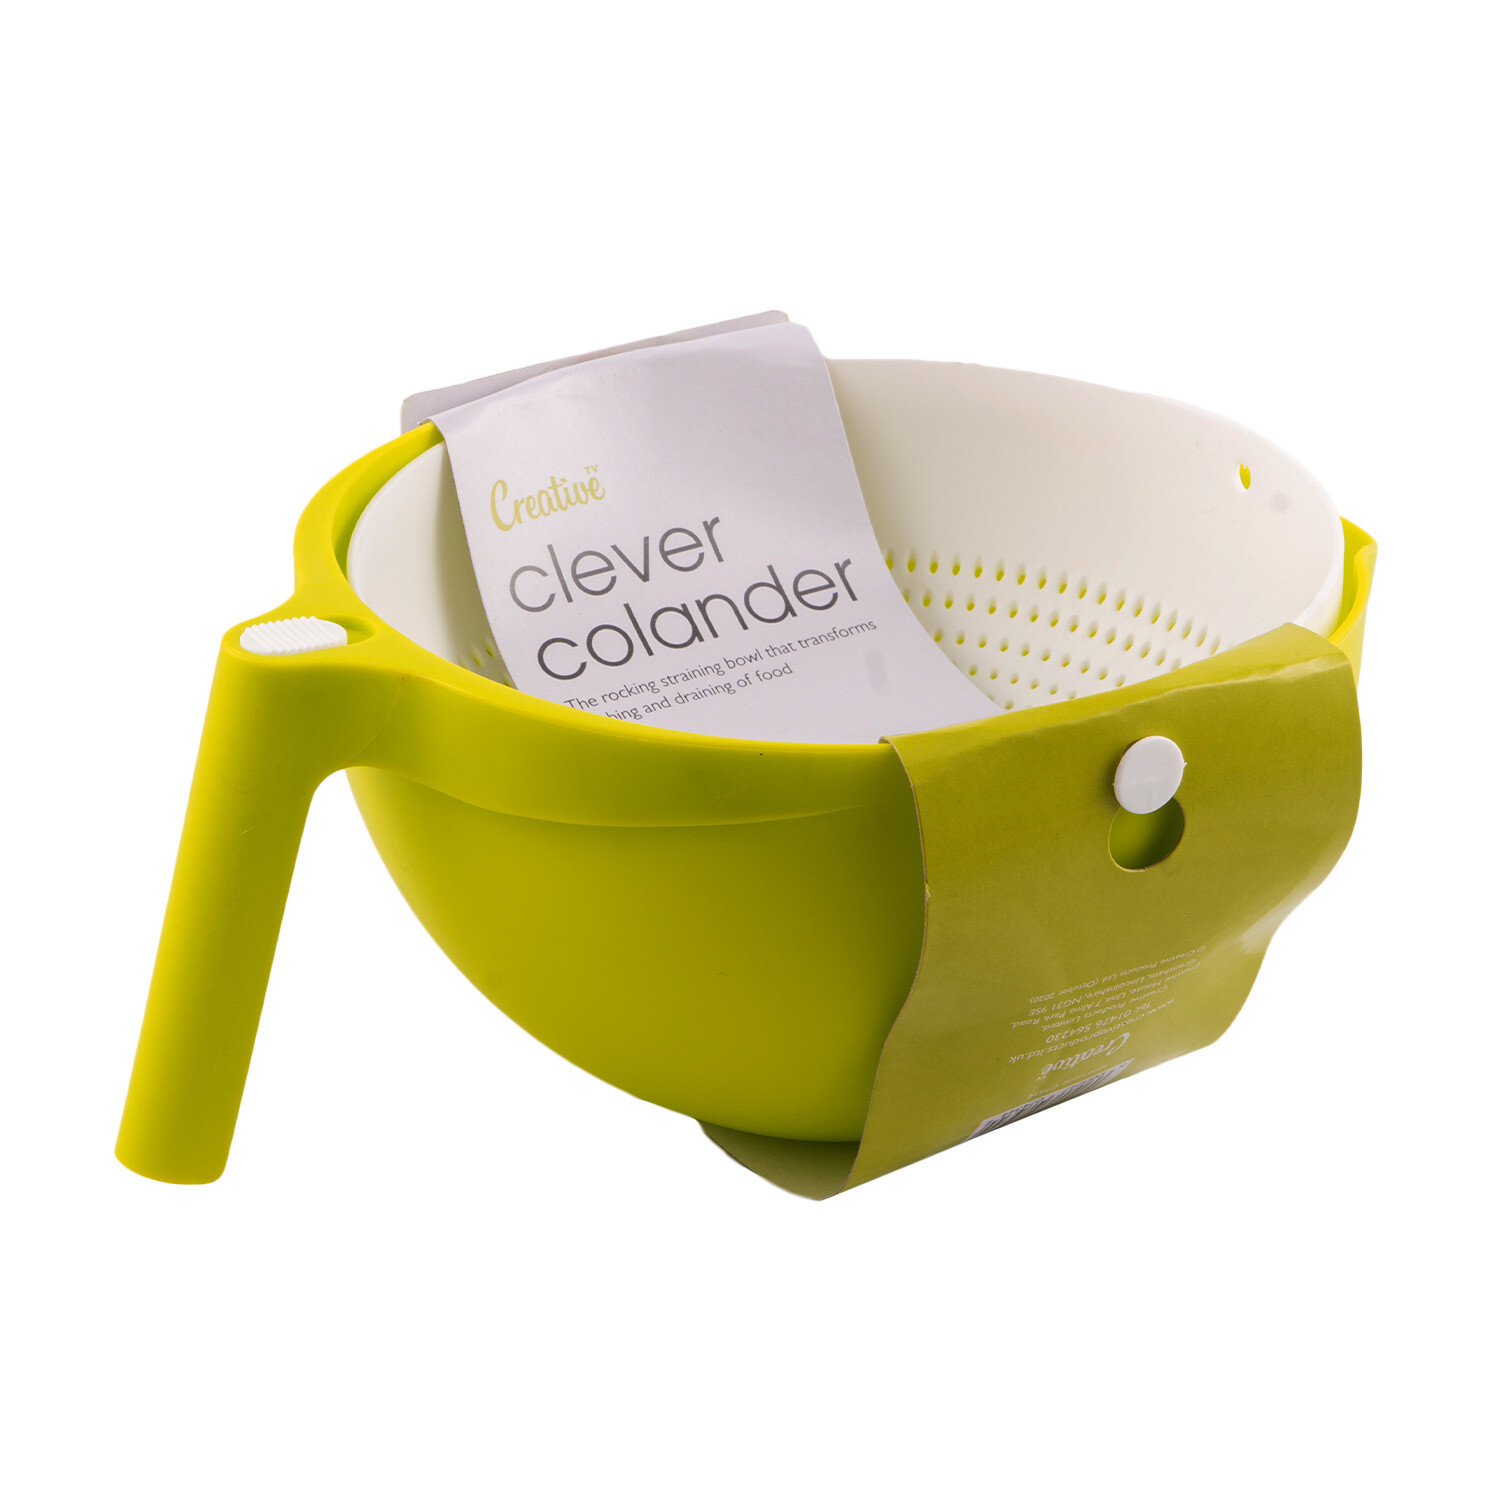 Creative Green Clever Colander Image 1